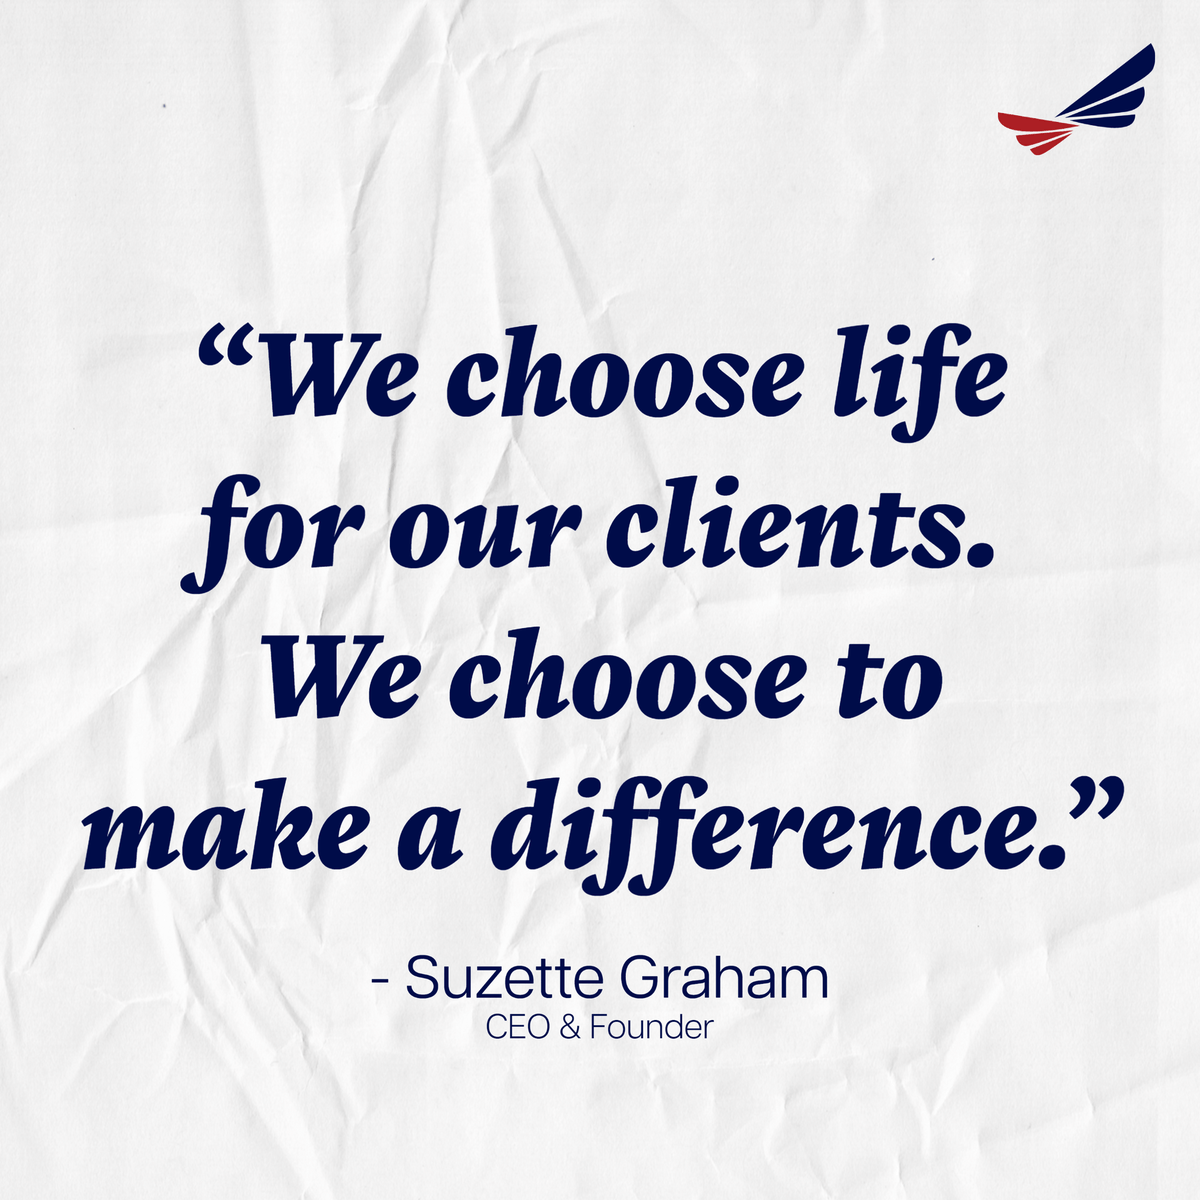 'We choose life for our clients. We choose to make a difference.' 
- Suzette Graham

How will you make a difference in someone's life today?🤔
-
#team #veterans #patriotangels #supportourtroops #militaryfamily #seniorliving #veteransbenefits #vabenefits